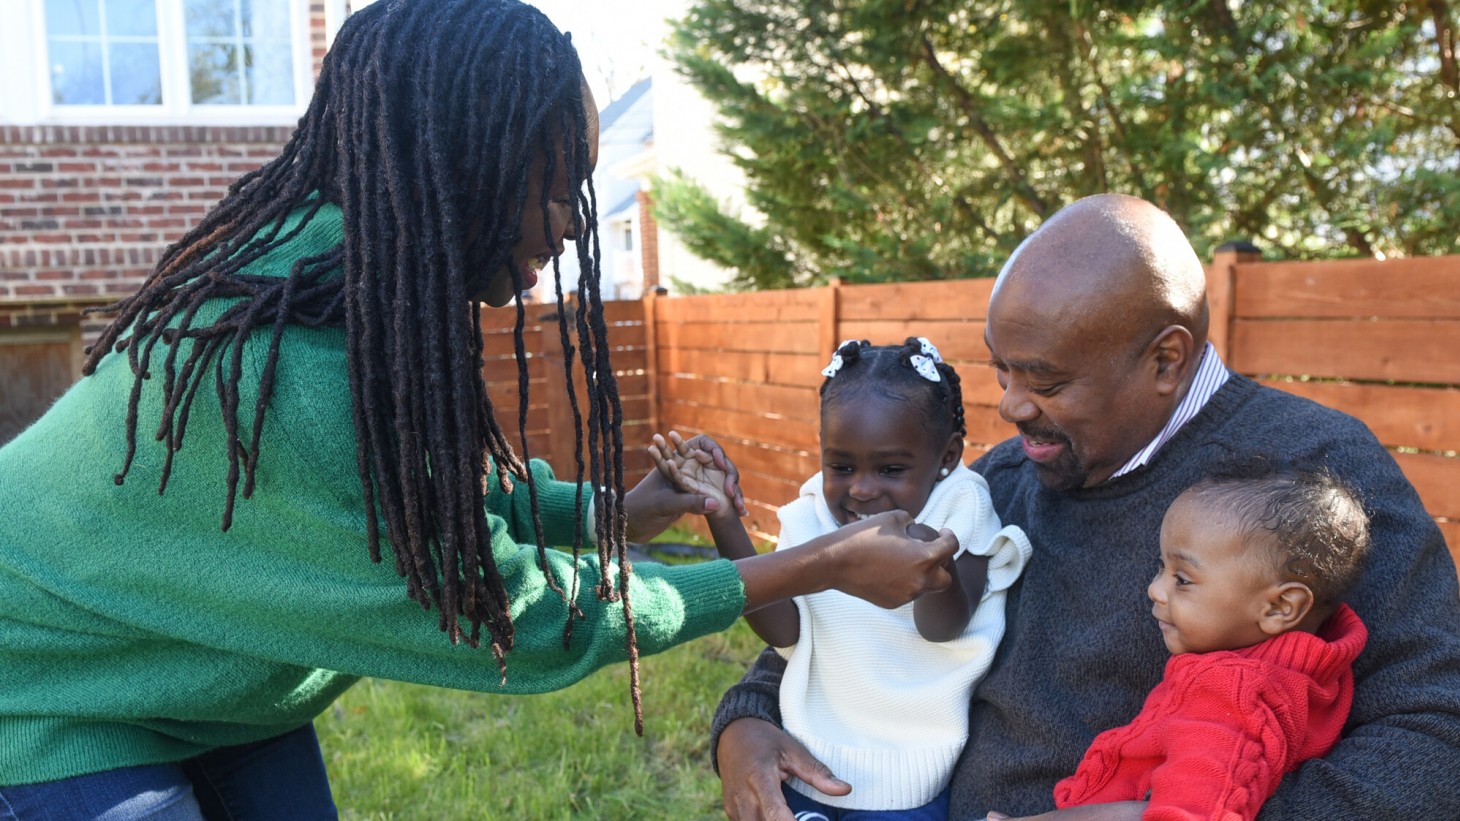 In a sunny backyard, a Black mom holds hands with her young daughter, who is sitting with her brother in the lap of their dad.